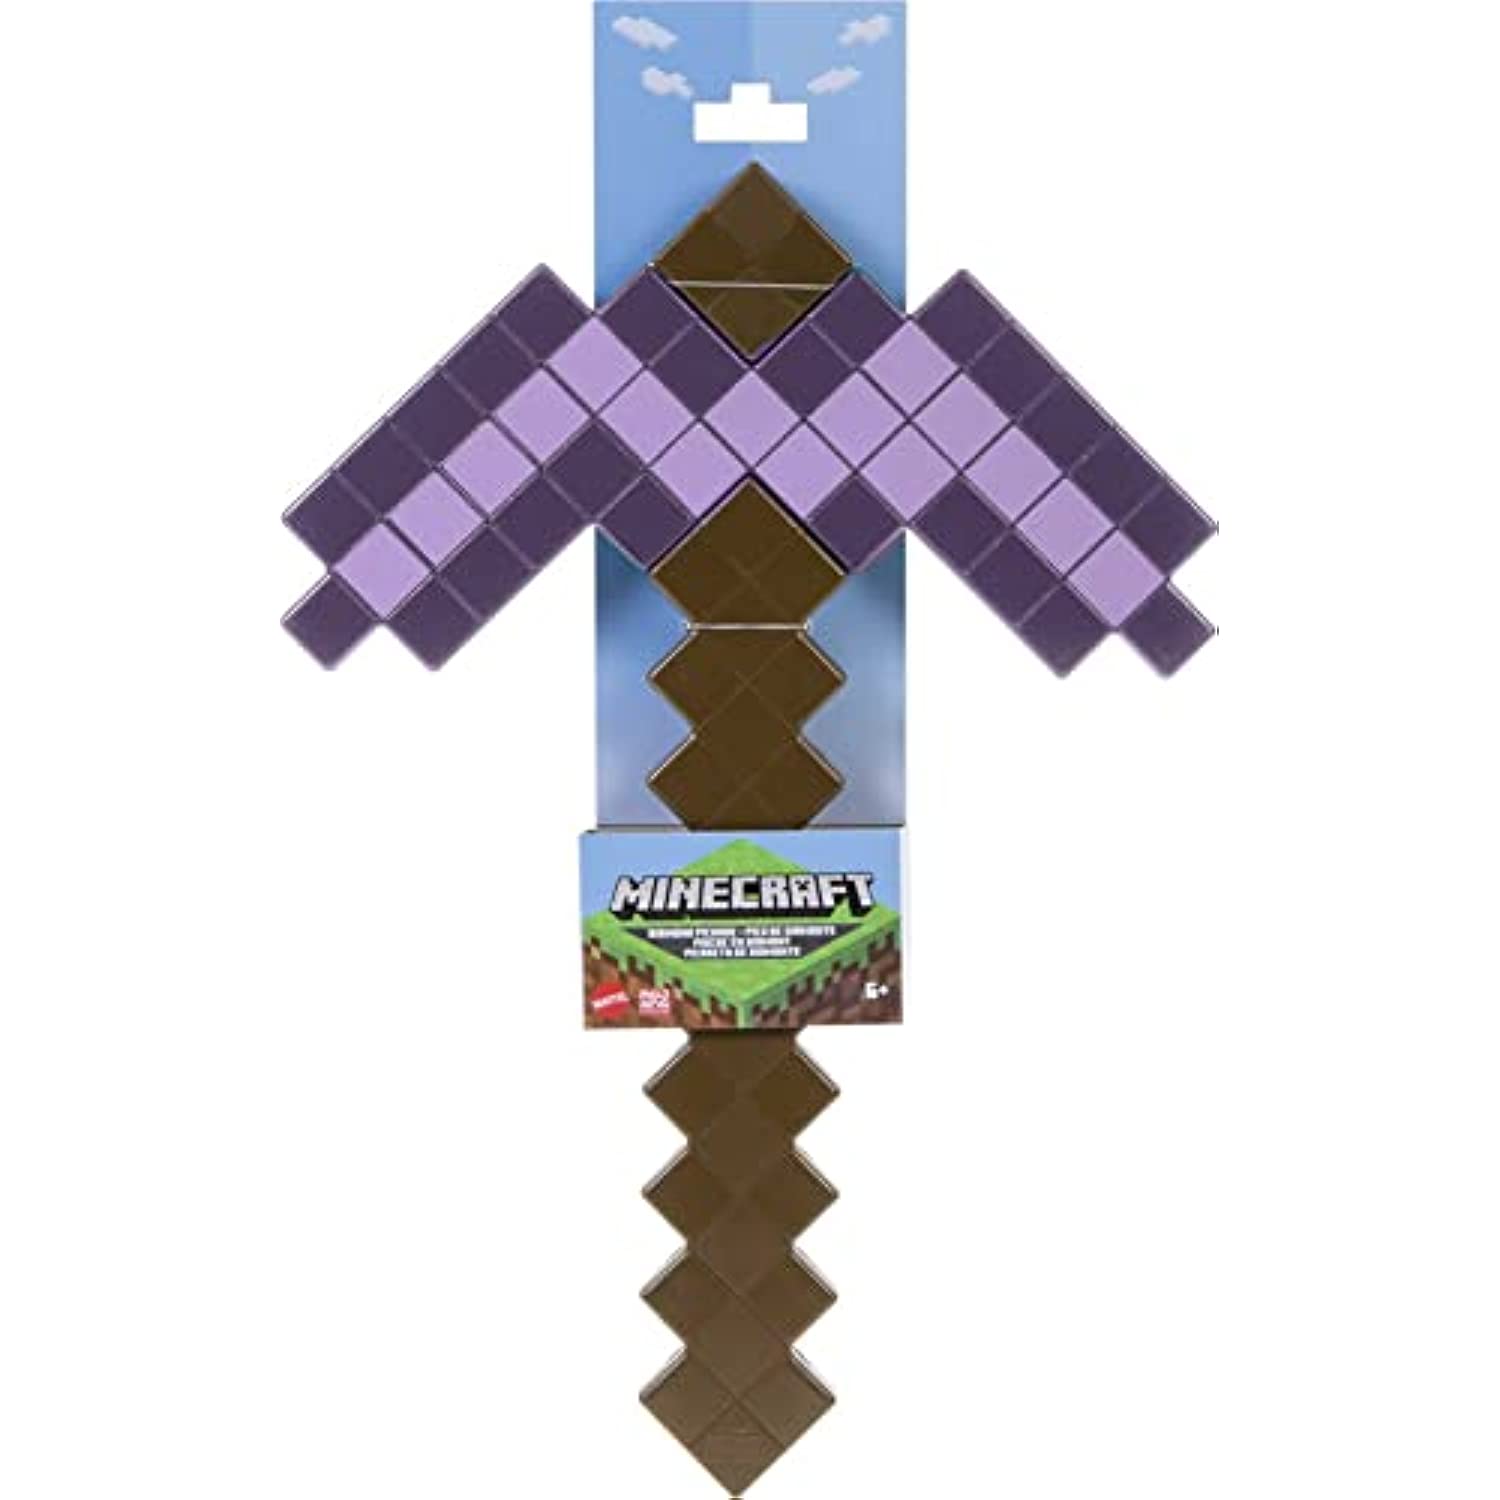 Minecraft Role-Play Accessory Collection, Child-Sized Enchanted Pickaxe